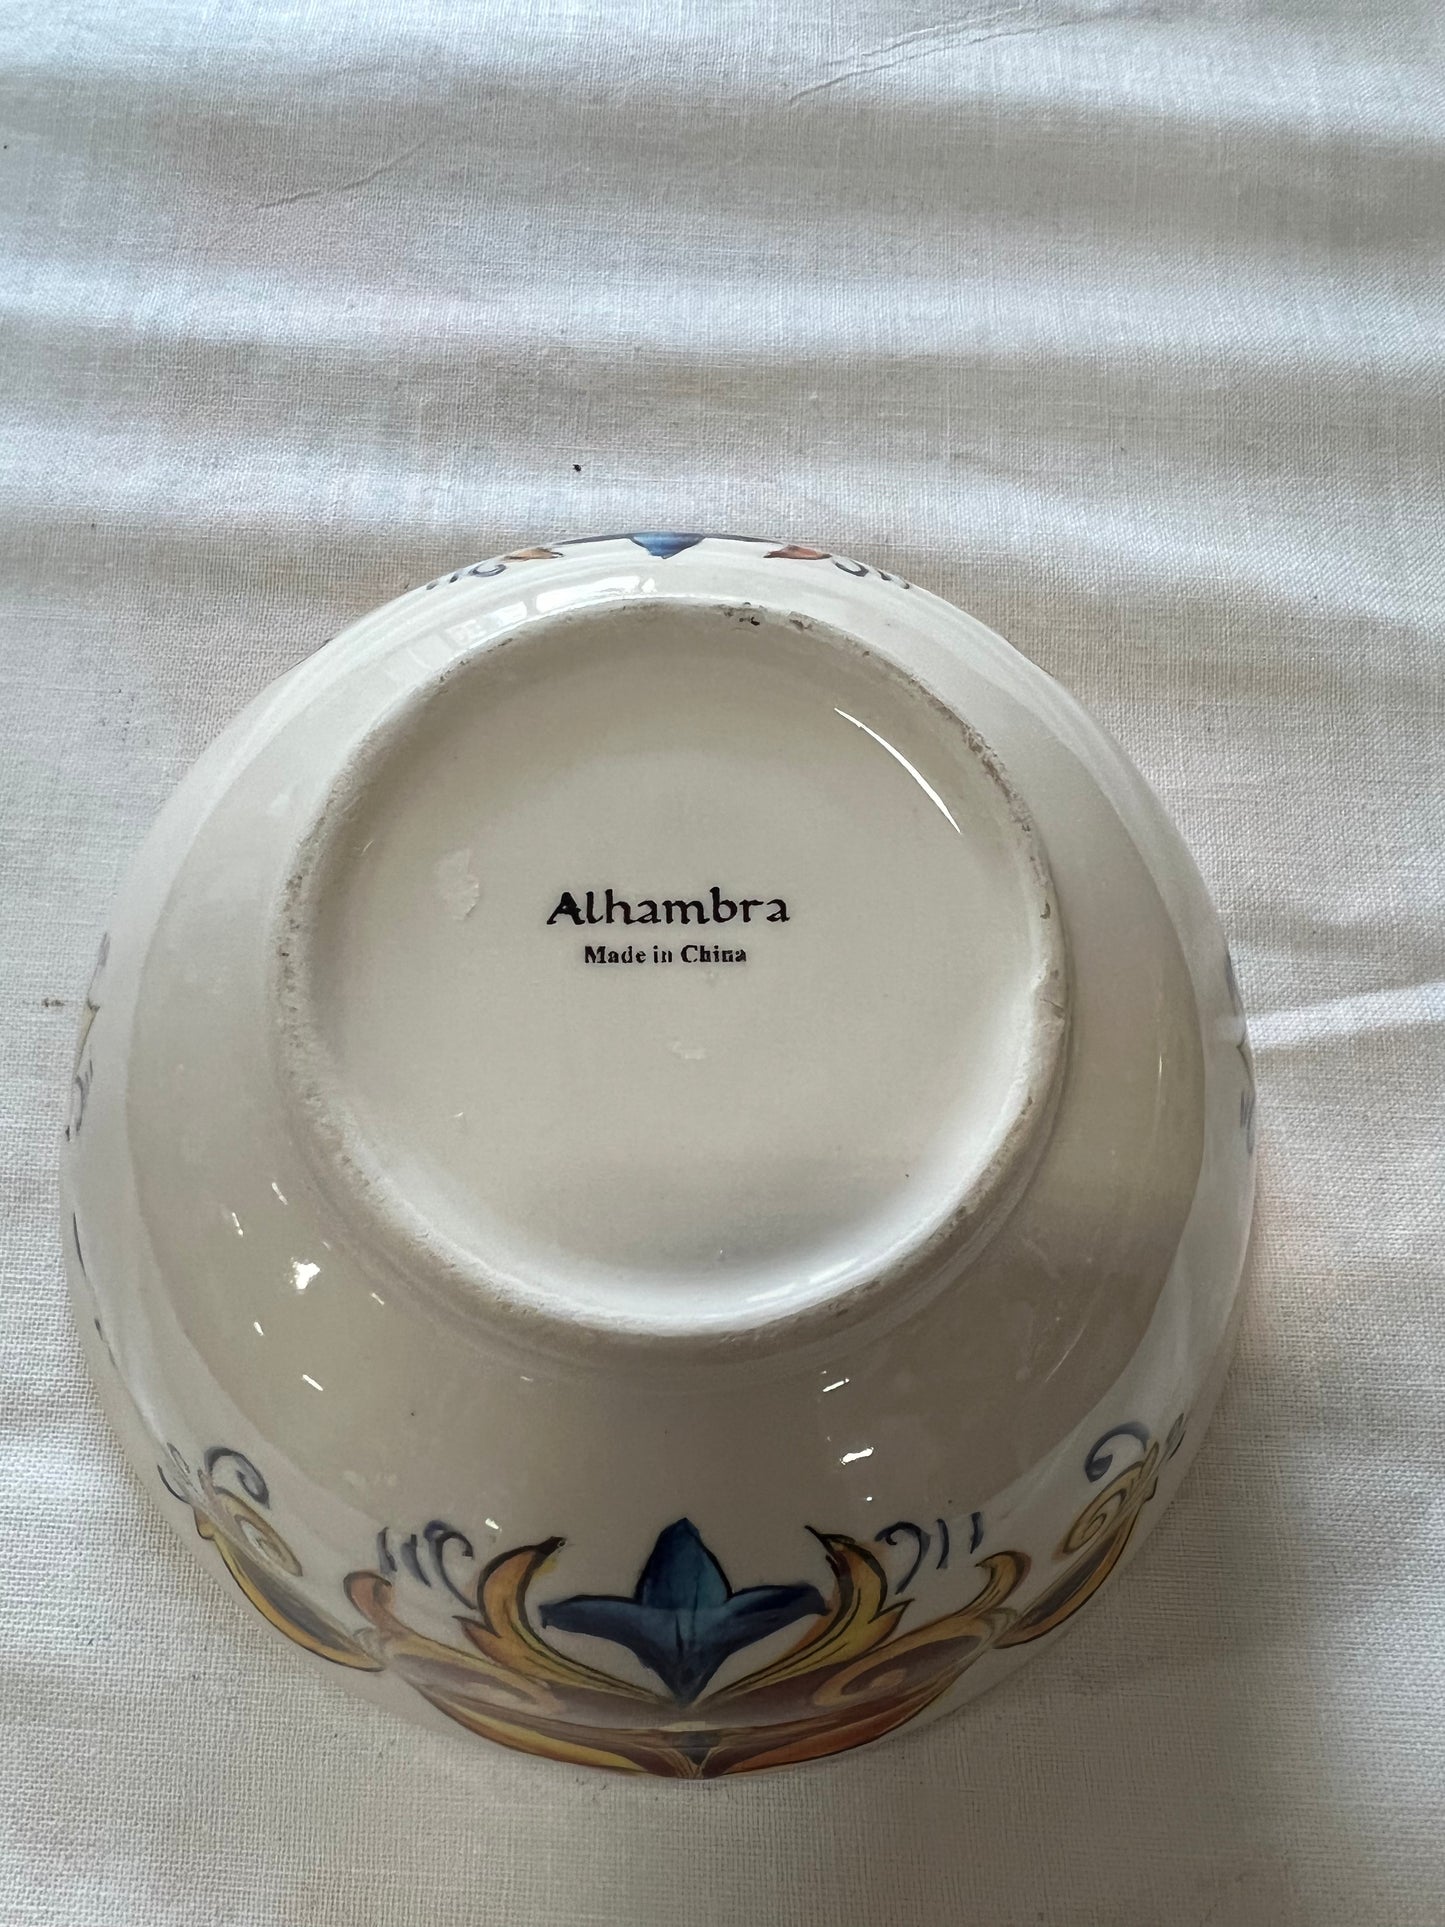 Alhambra serving dishes